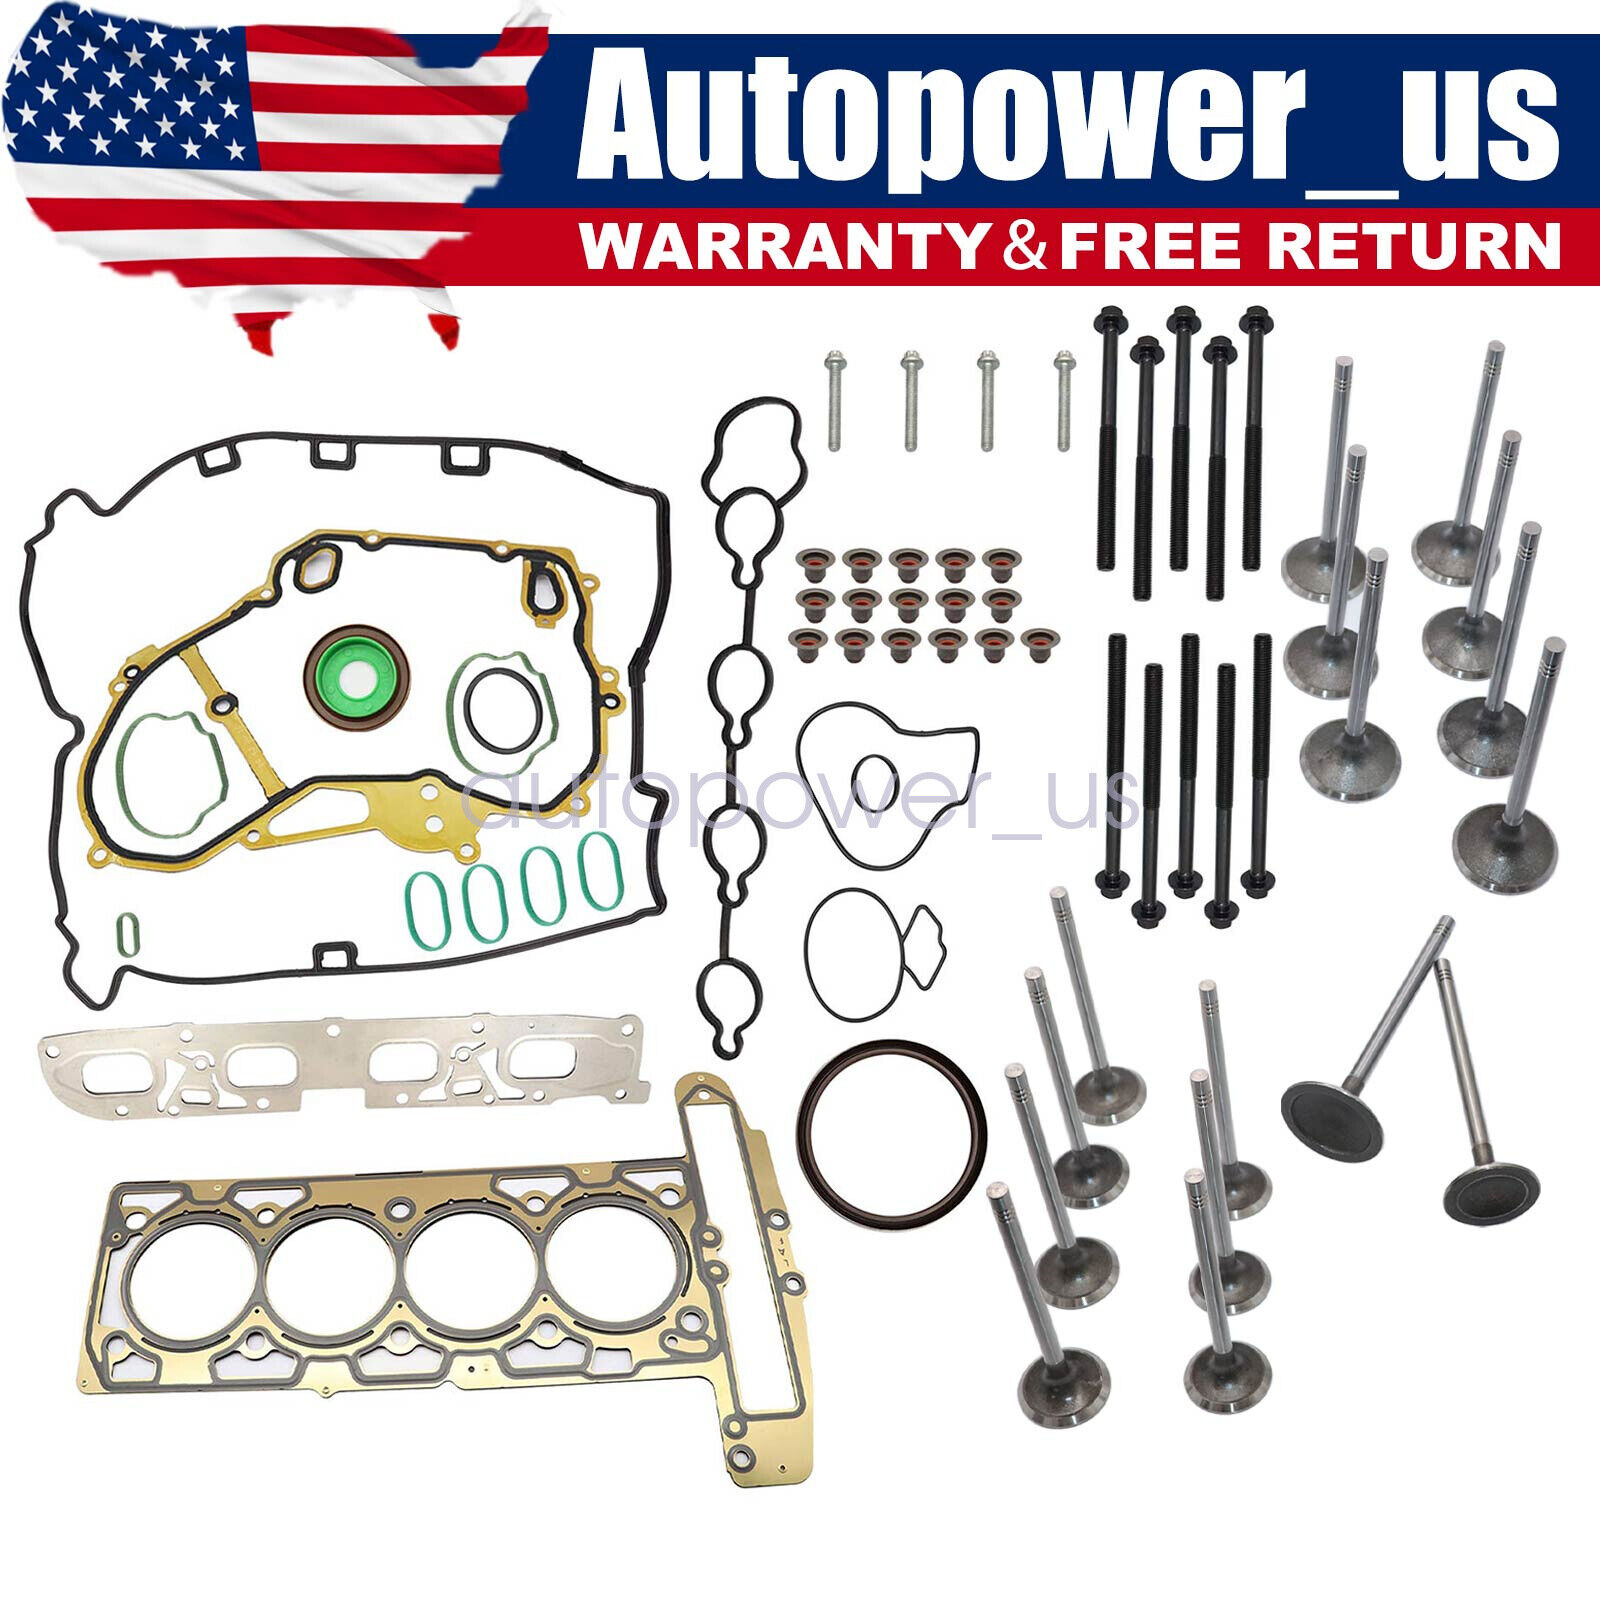 Head Gasket Bolts&Intake Exhaust Valves Fit 2010-2013 Chevrolet Buick GMC 2.4L